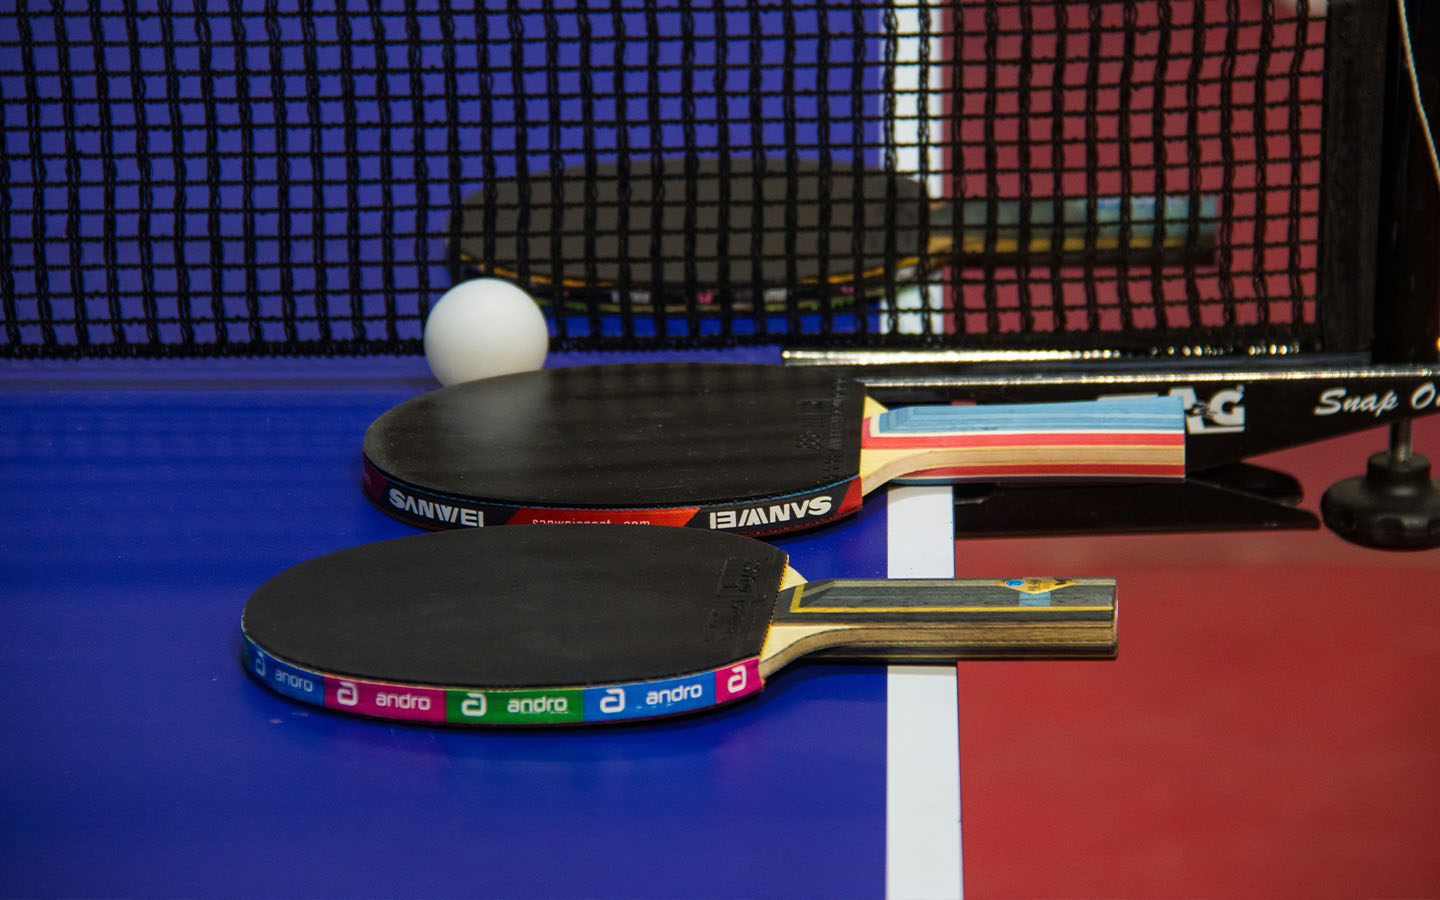 The Table Tennis World Cup is coming to Macau